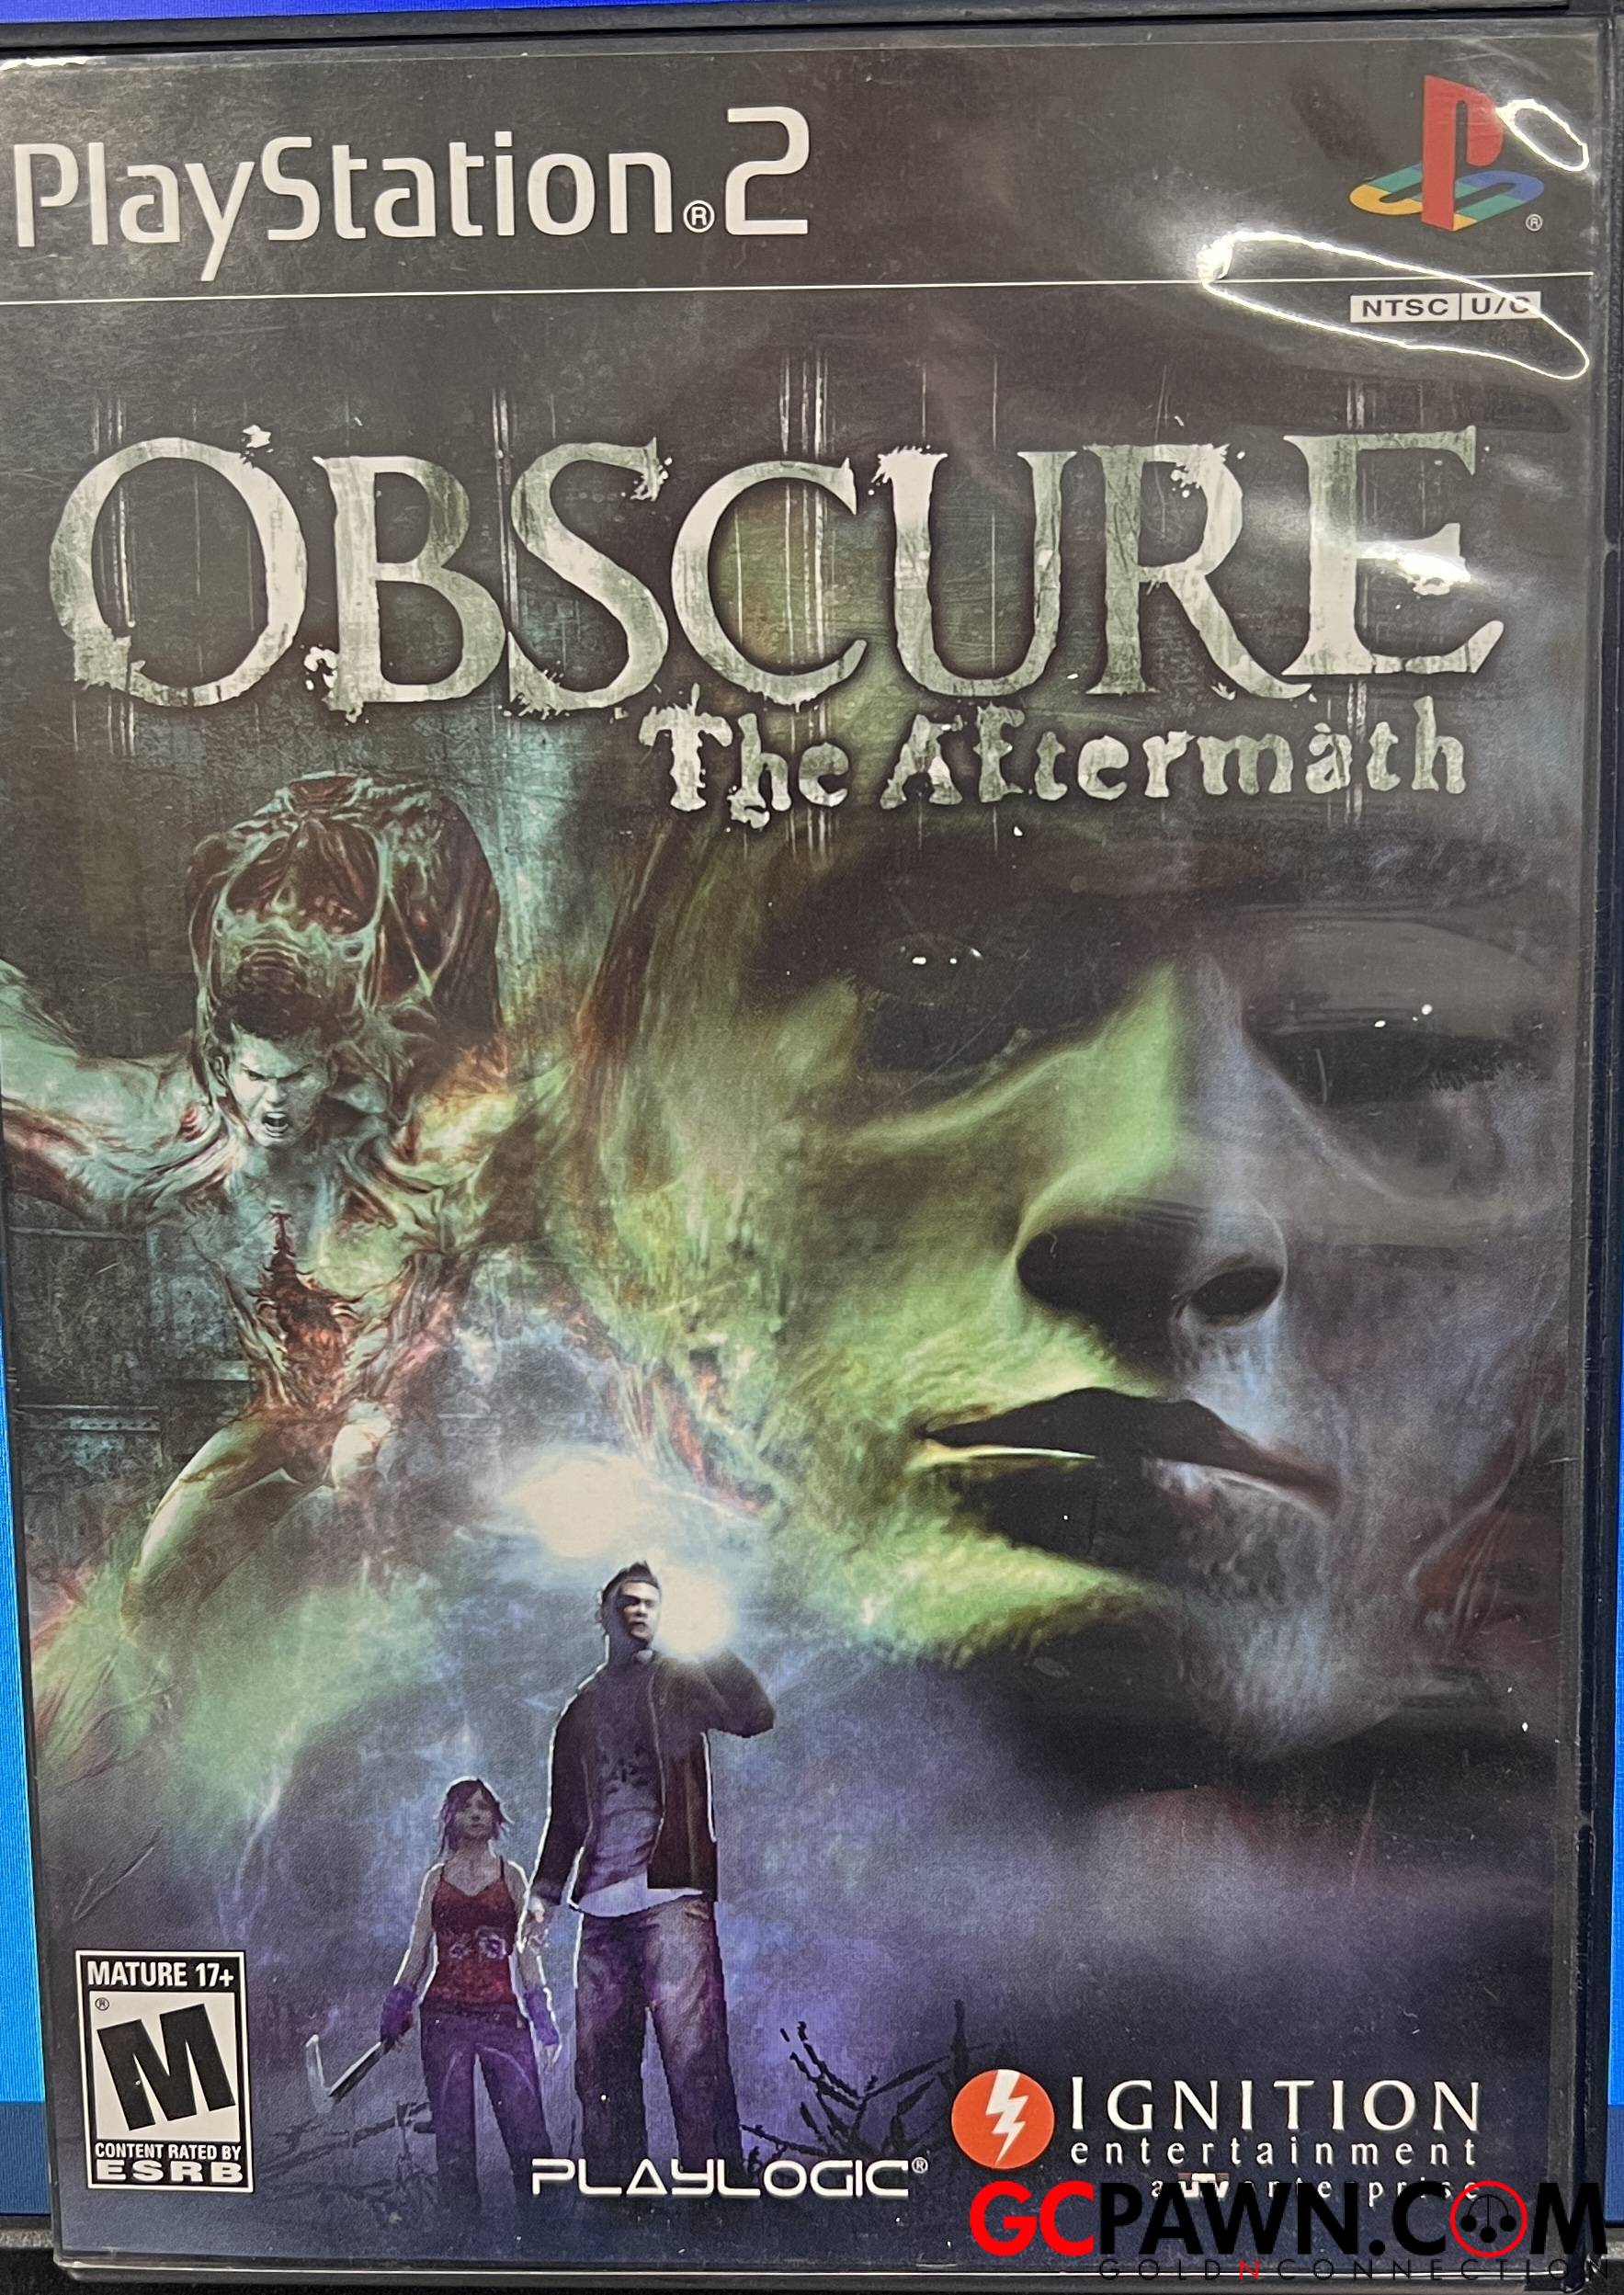 Obscure The Aftermath Sony Playstation 2 Game